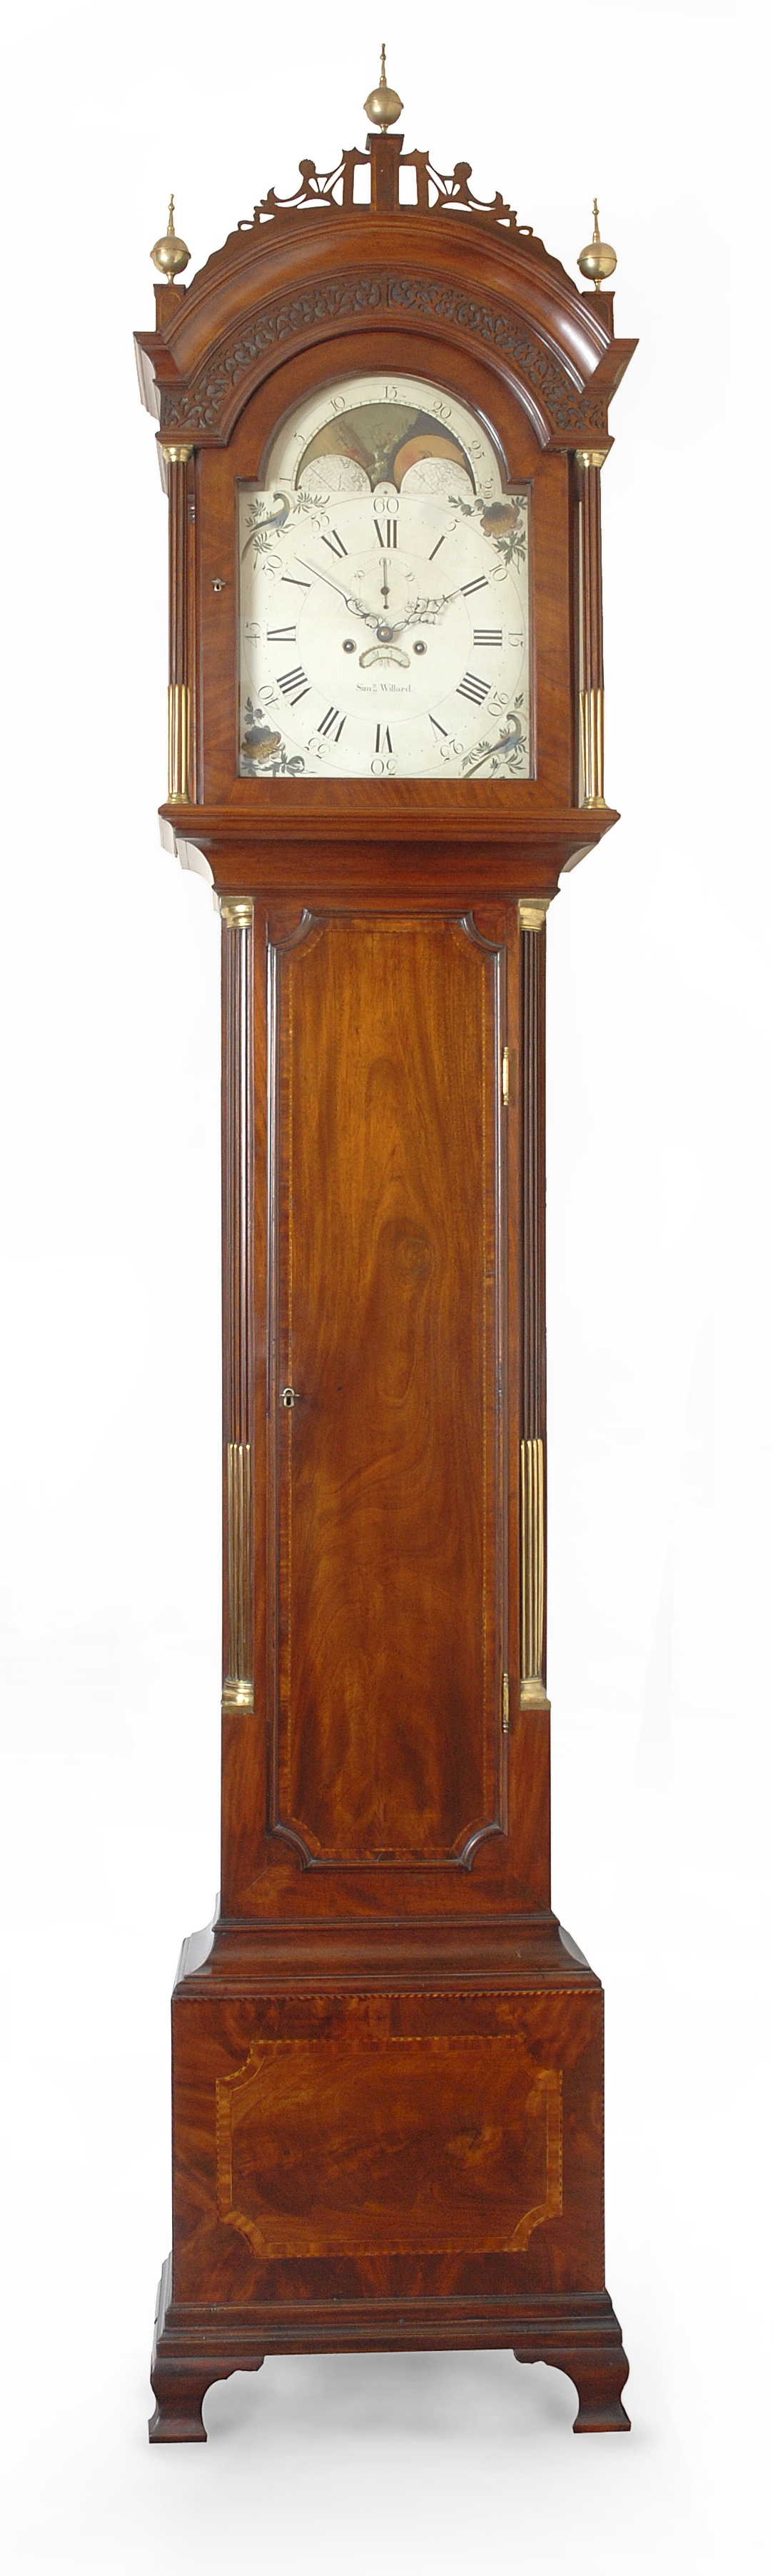 A highly important Chippendale tall case clock by Simon Willard, Roxbury, Massachusetts, circa 1790. The case attributed to Stephen Badlam, Dorchester.